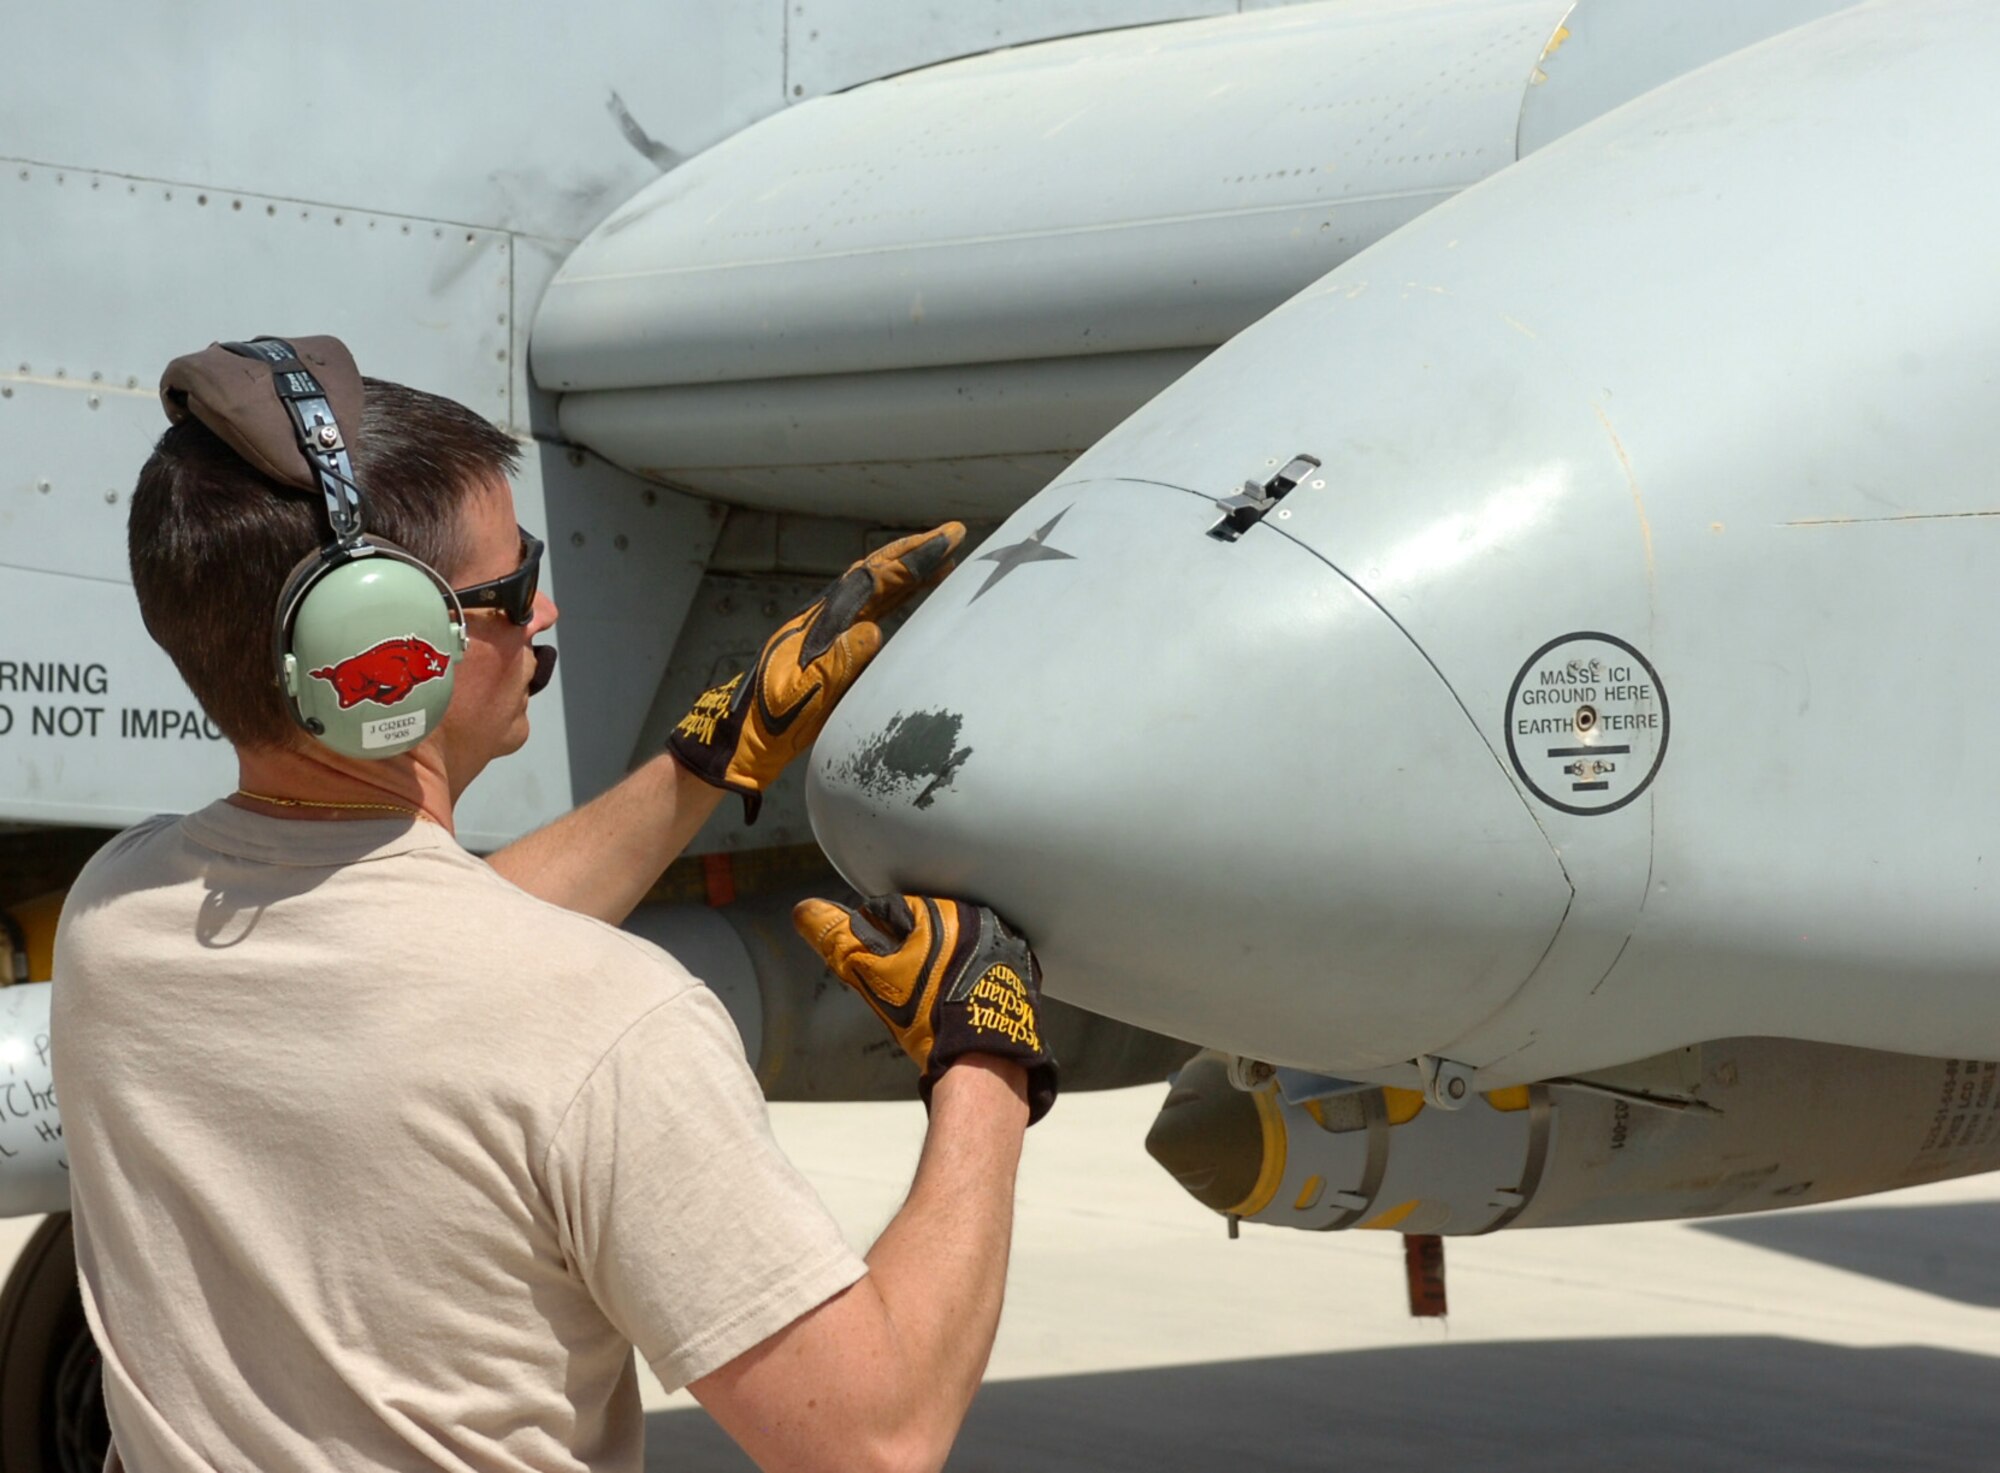 Master Sgt. Jay Greer, an aircraft crew chief from the 188th Fighter Wing, Arkansas Air National Guard, based in Fort Smith, buttons up a wing pod on his A-10C Thunderbolt II aircraft before takeoff. Greer and more than 250 members of the 188th are deployed to Kandahar Airfield, Afghanistan as part of an Air Expeditionary Force rotation through May. (Photo by Lt. Col. Keith Moore/Arkansas Air National Guard Public Affairs).